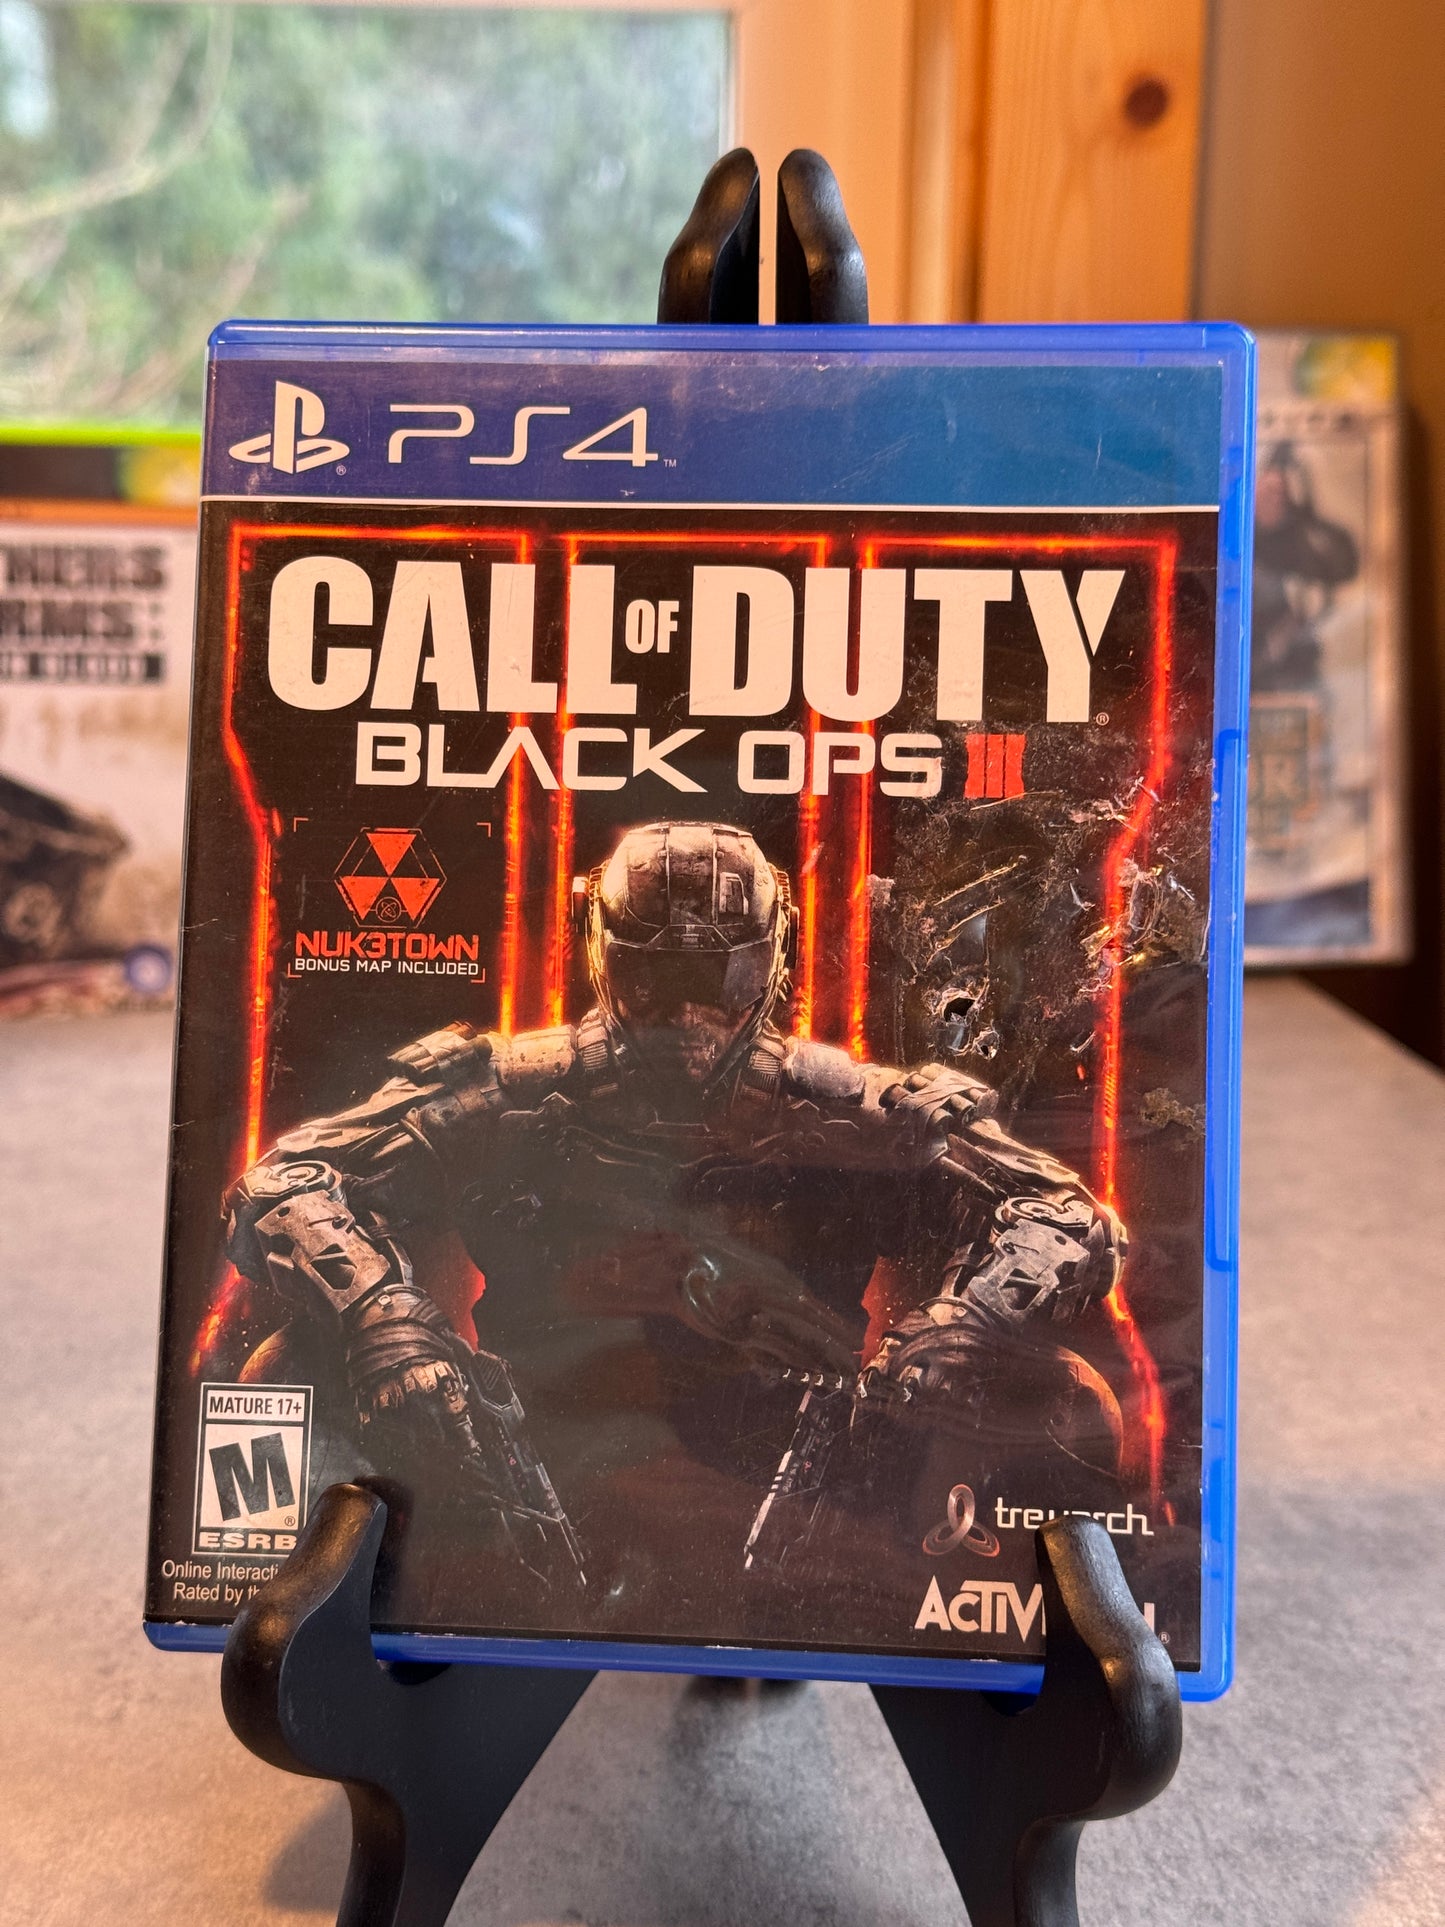 Call Of Duty Black Ops lll - PS4 Game